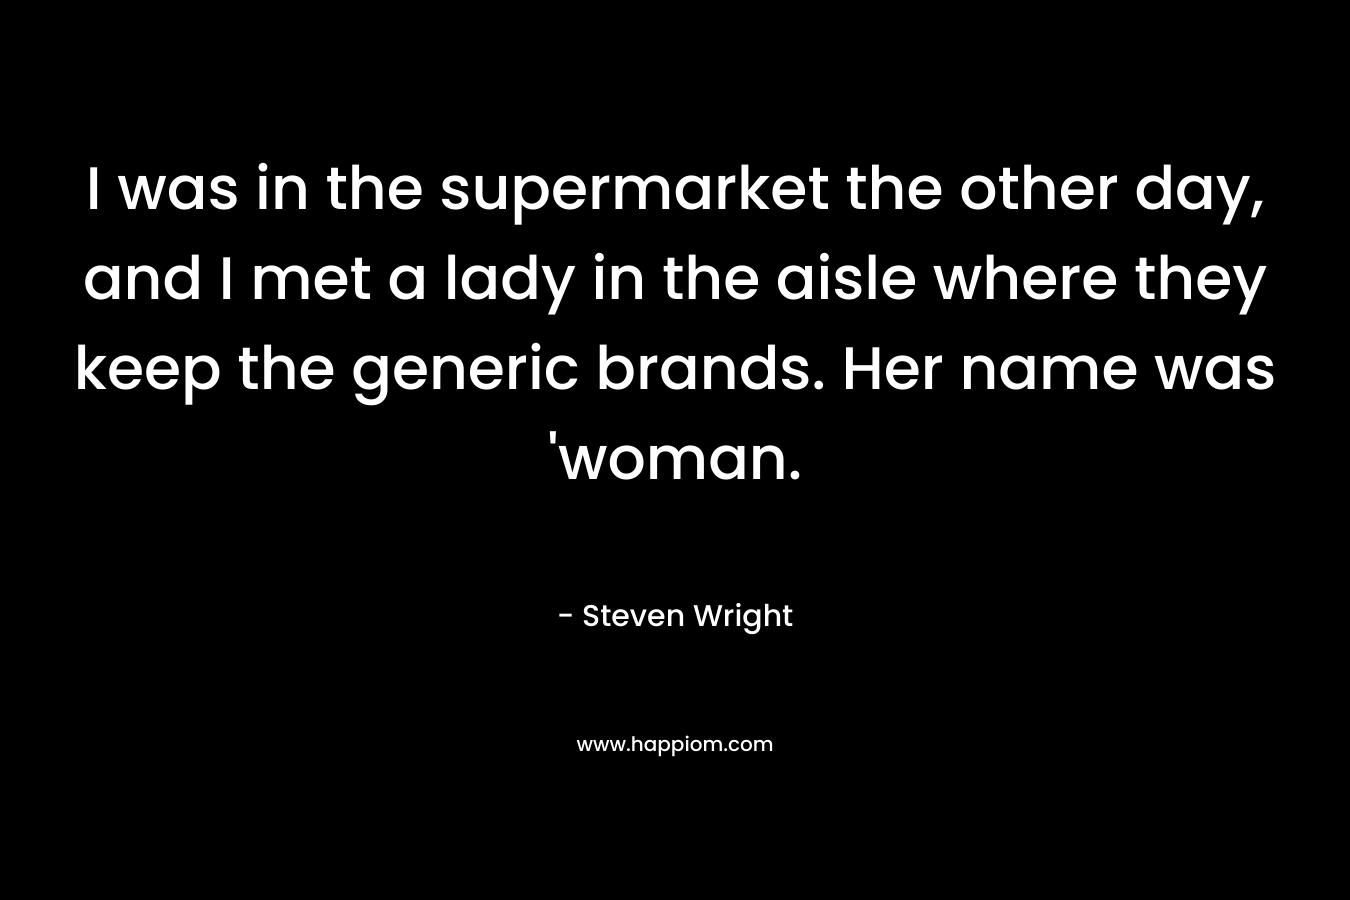 I was in the supermarket the other day, and I met a lady in the aisle where they keep the generic brands. Her name was 'woman.